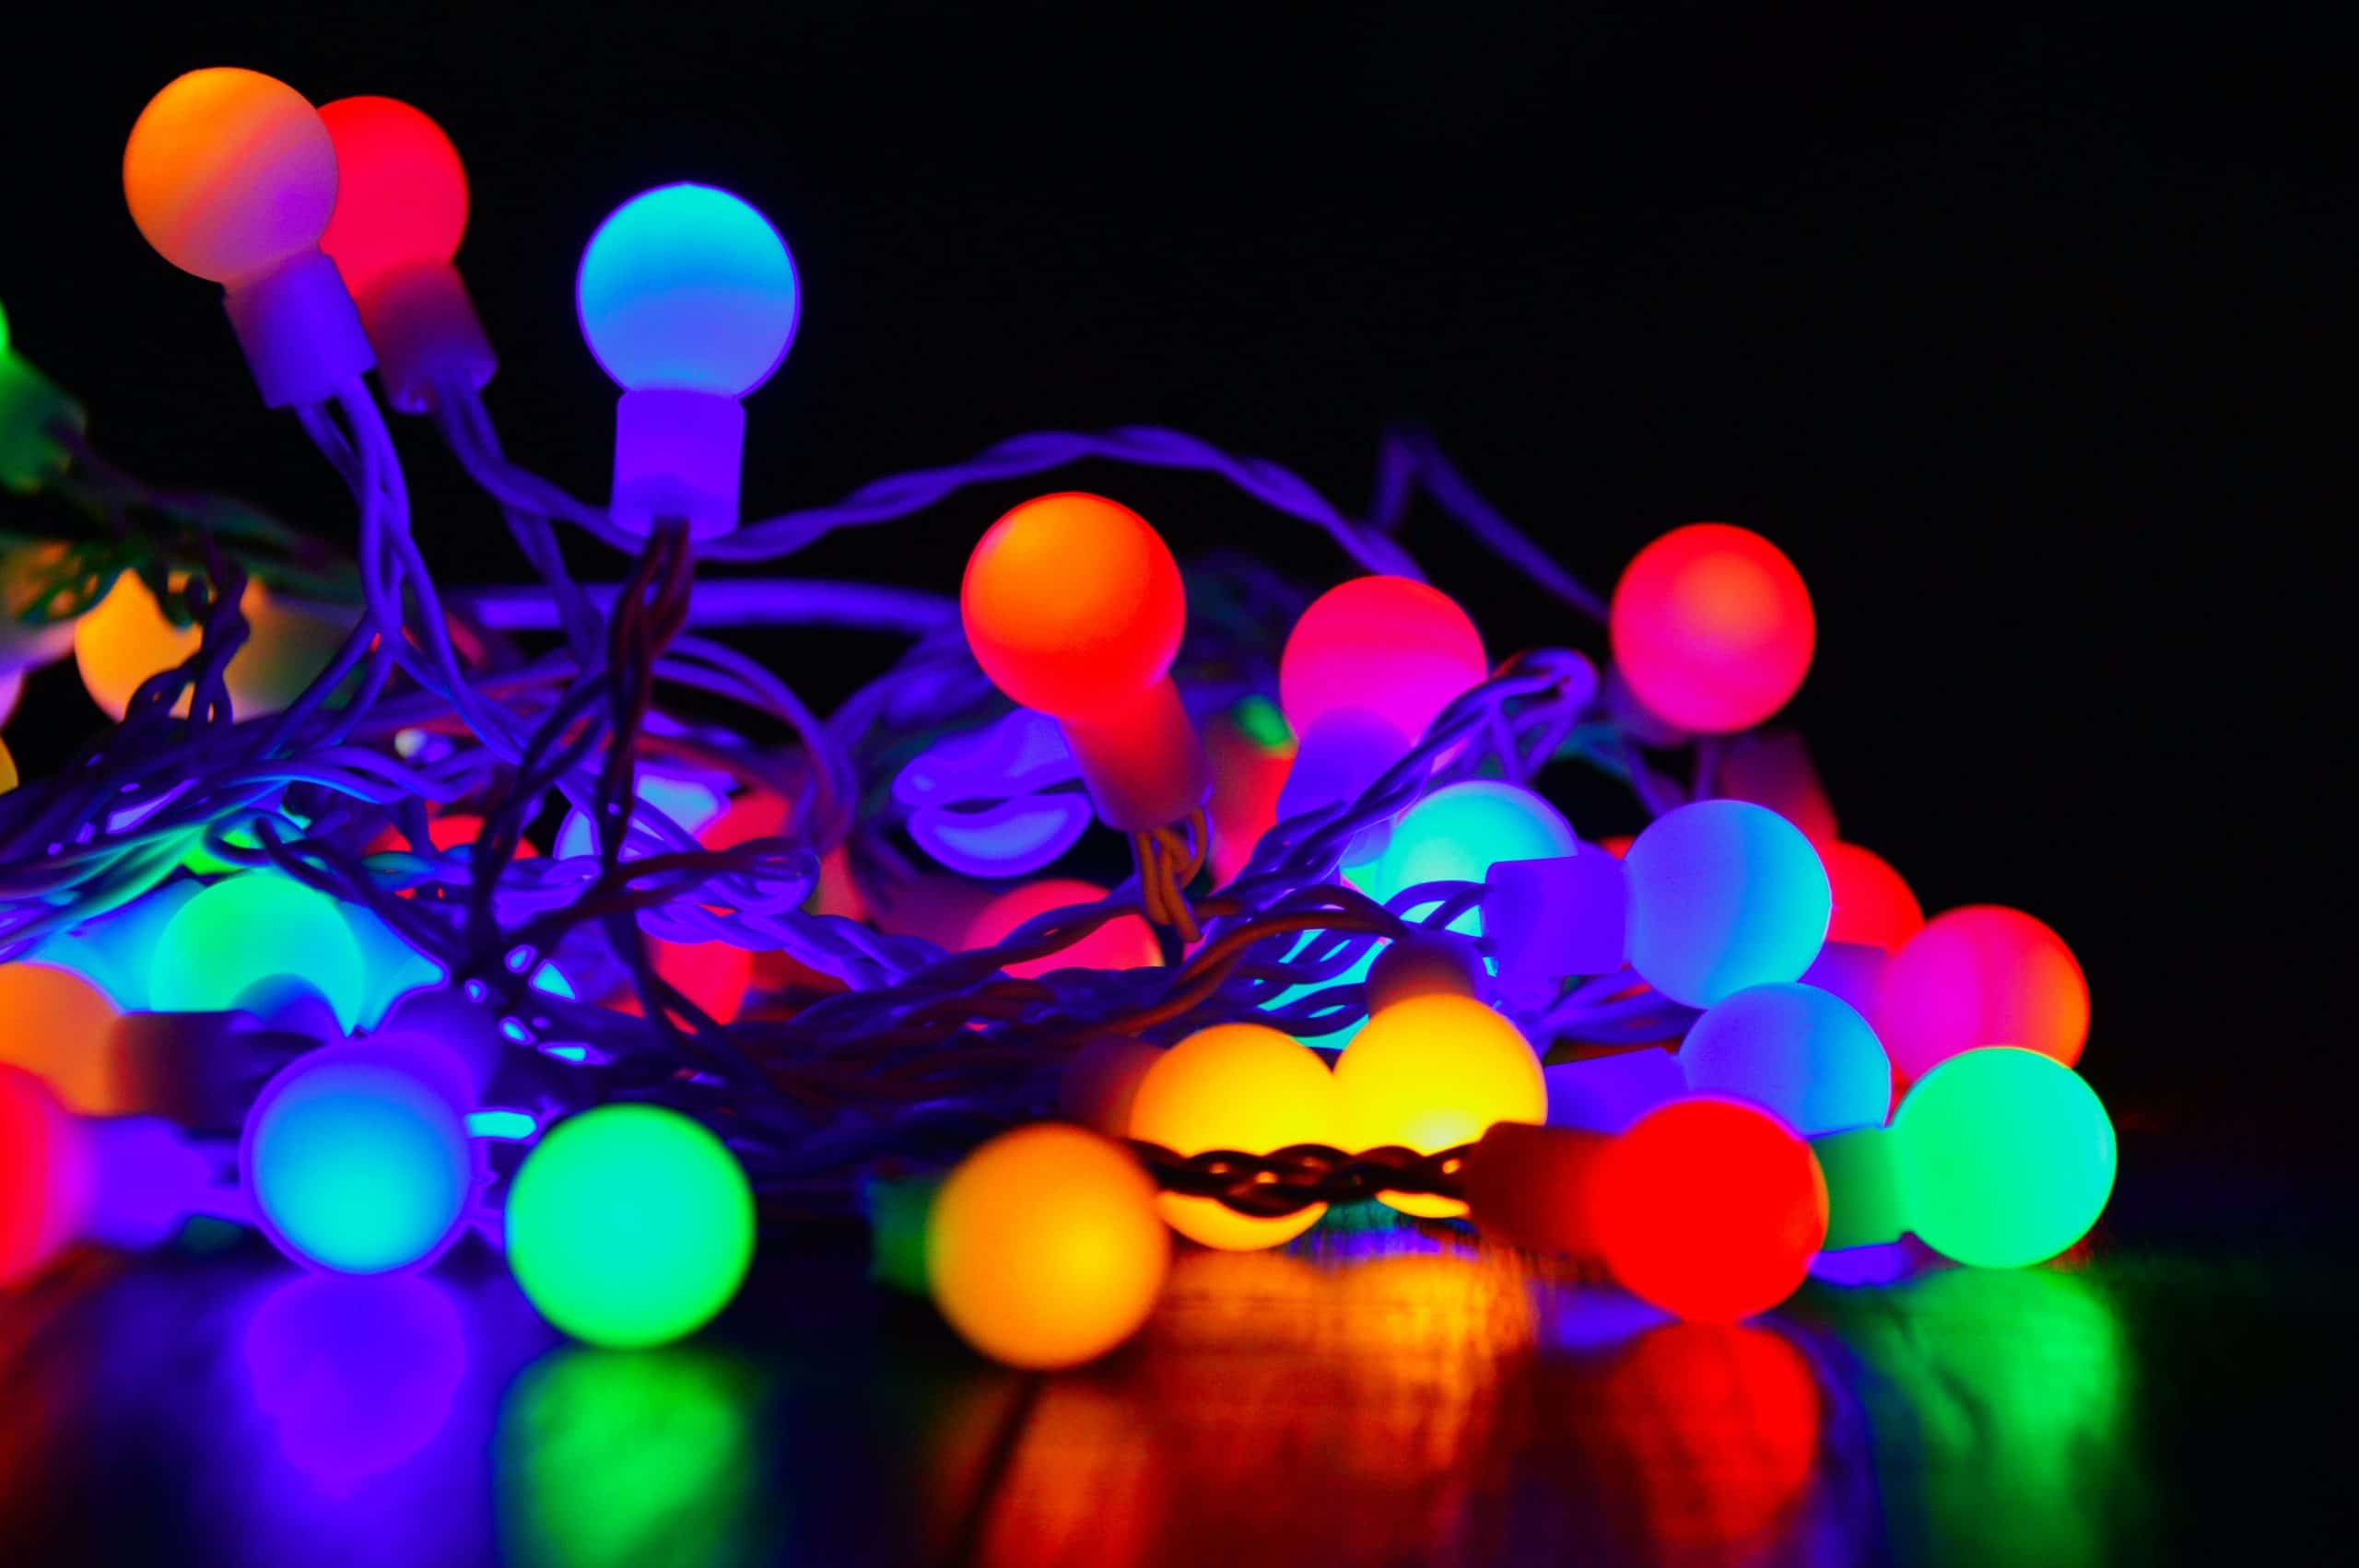 pictured is a lighted set of round old style christmas bulbs of many colors